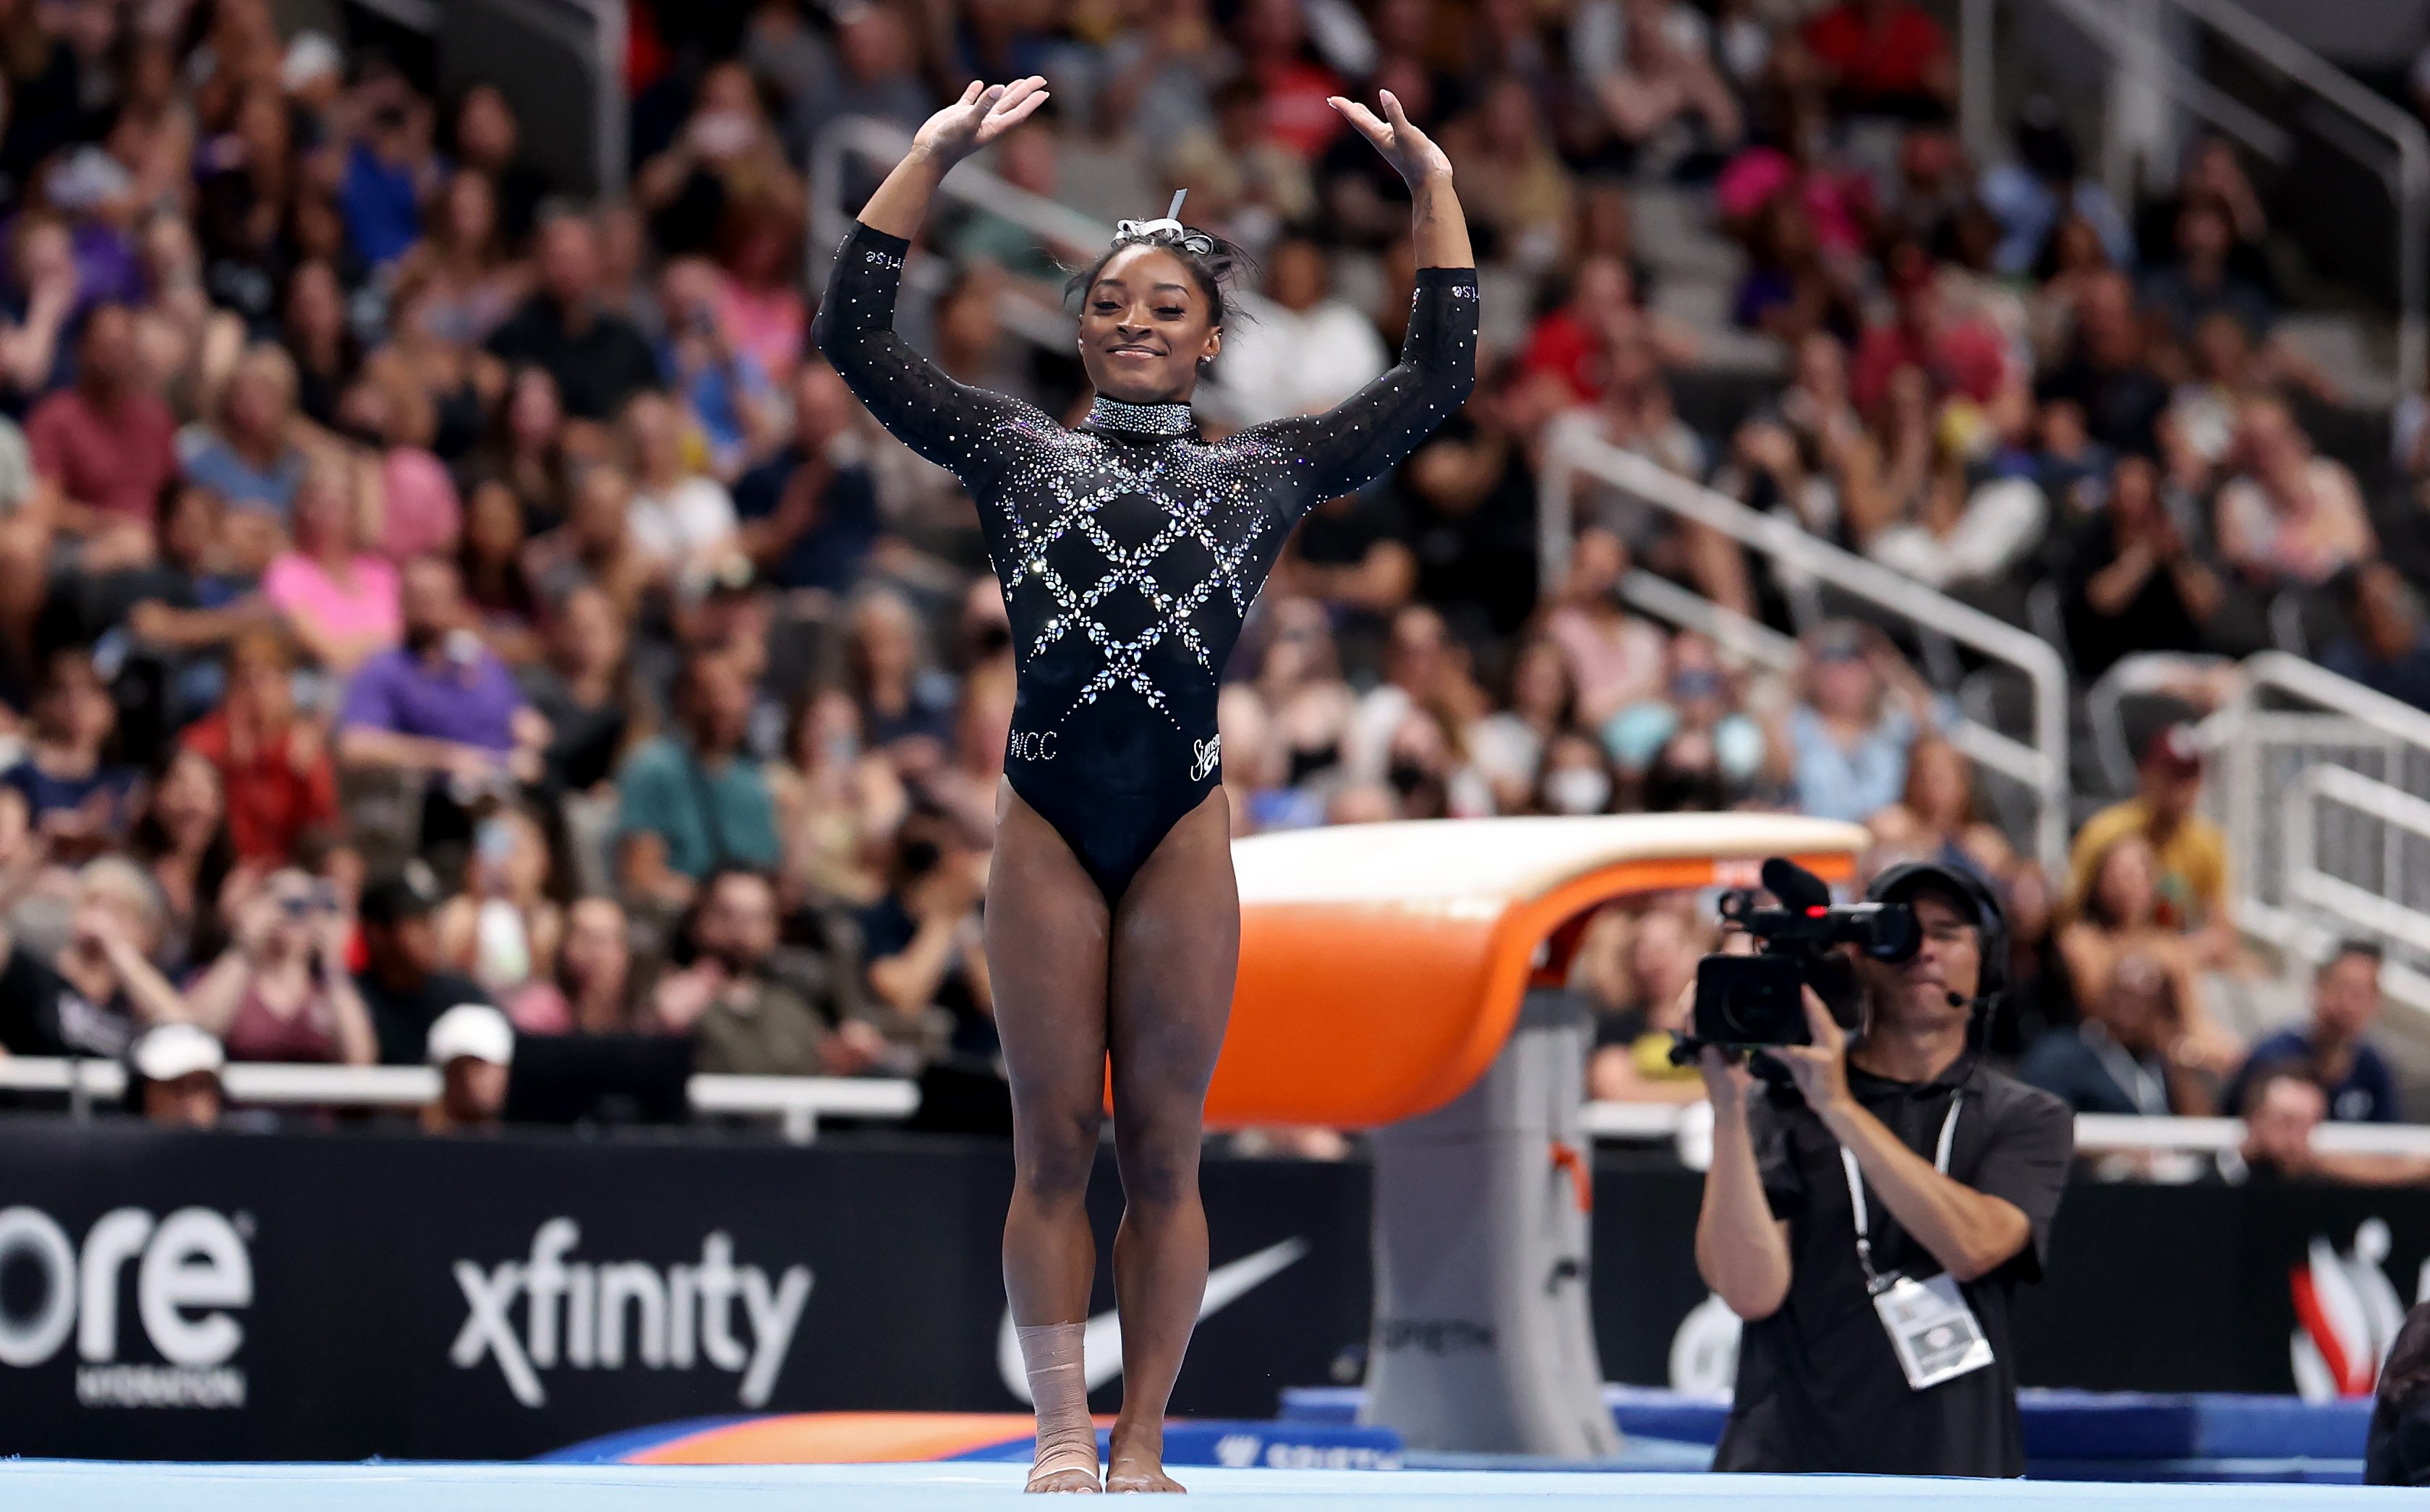 Simone Biles competes in the floor exercise on day four of the 2023 U.S. Gymnastics Championships at SAP Center on August 27, 2023 in San Jose, California.